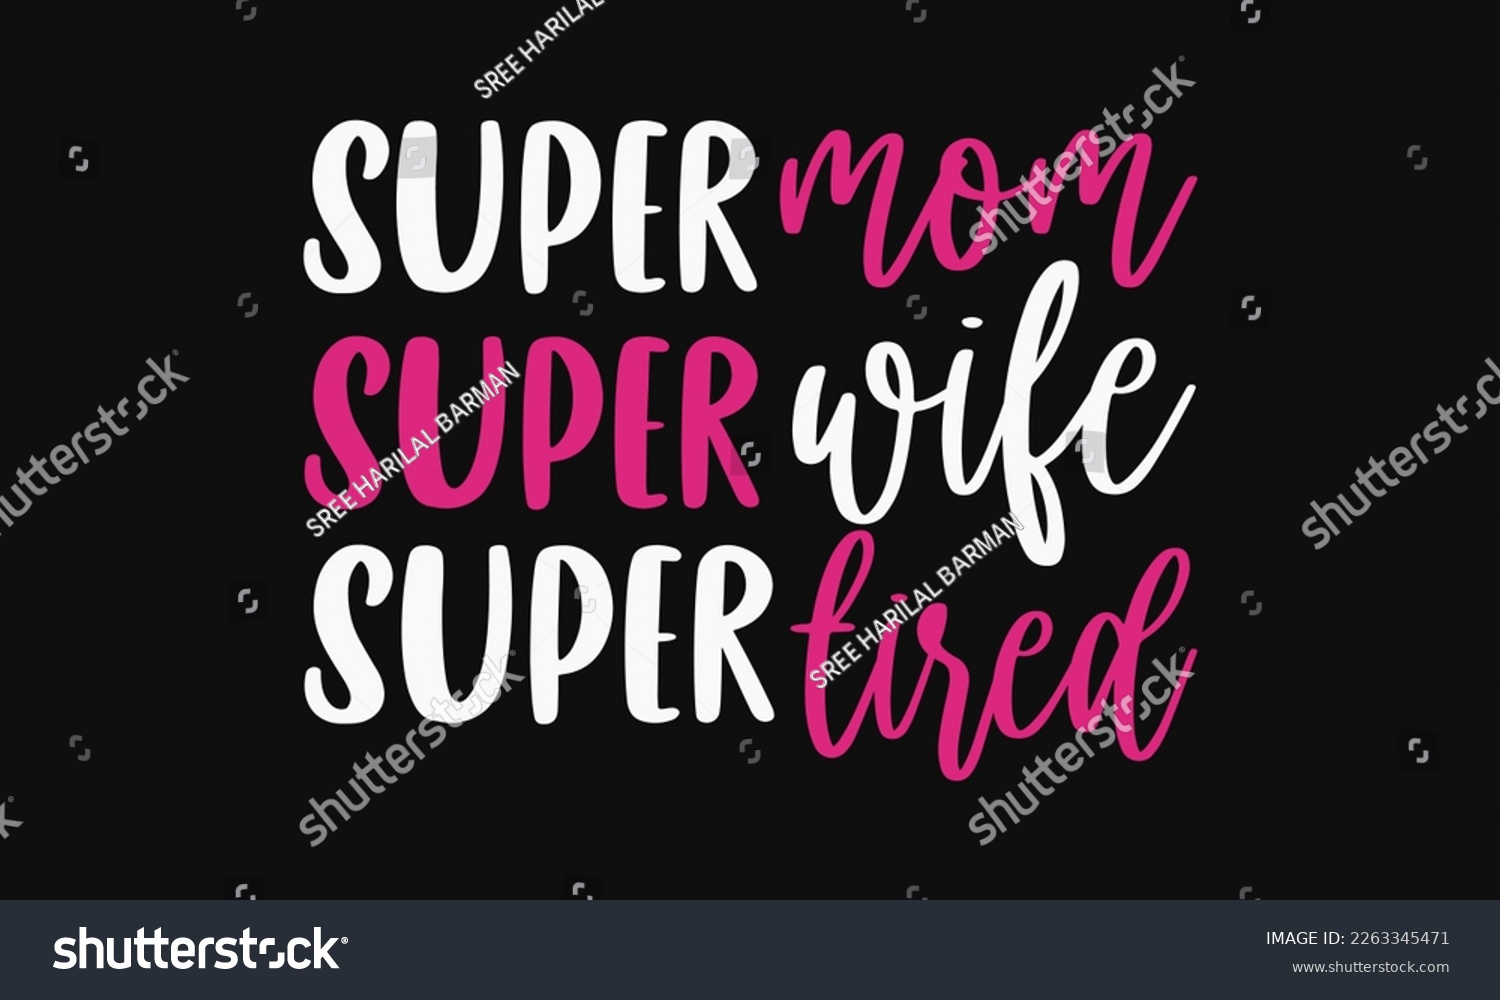 SVG of Super mom super wife super tired - Mother's day svg t-shirt design. celebration in calligraphy text or font means March 21 Mother's Day in the Middle East. greeting cards, mugs, brochures, posters. svg